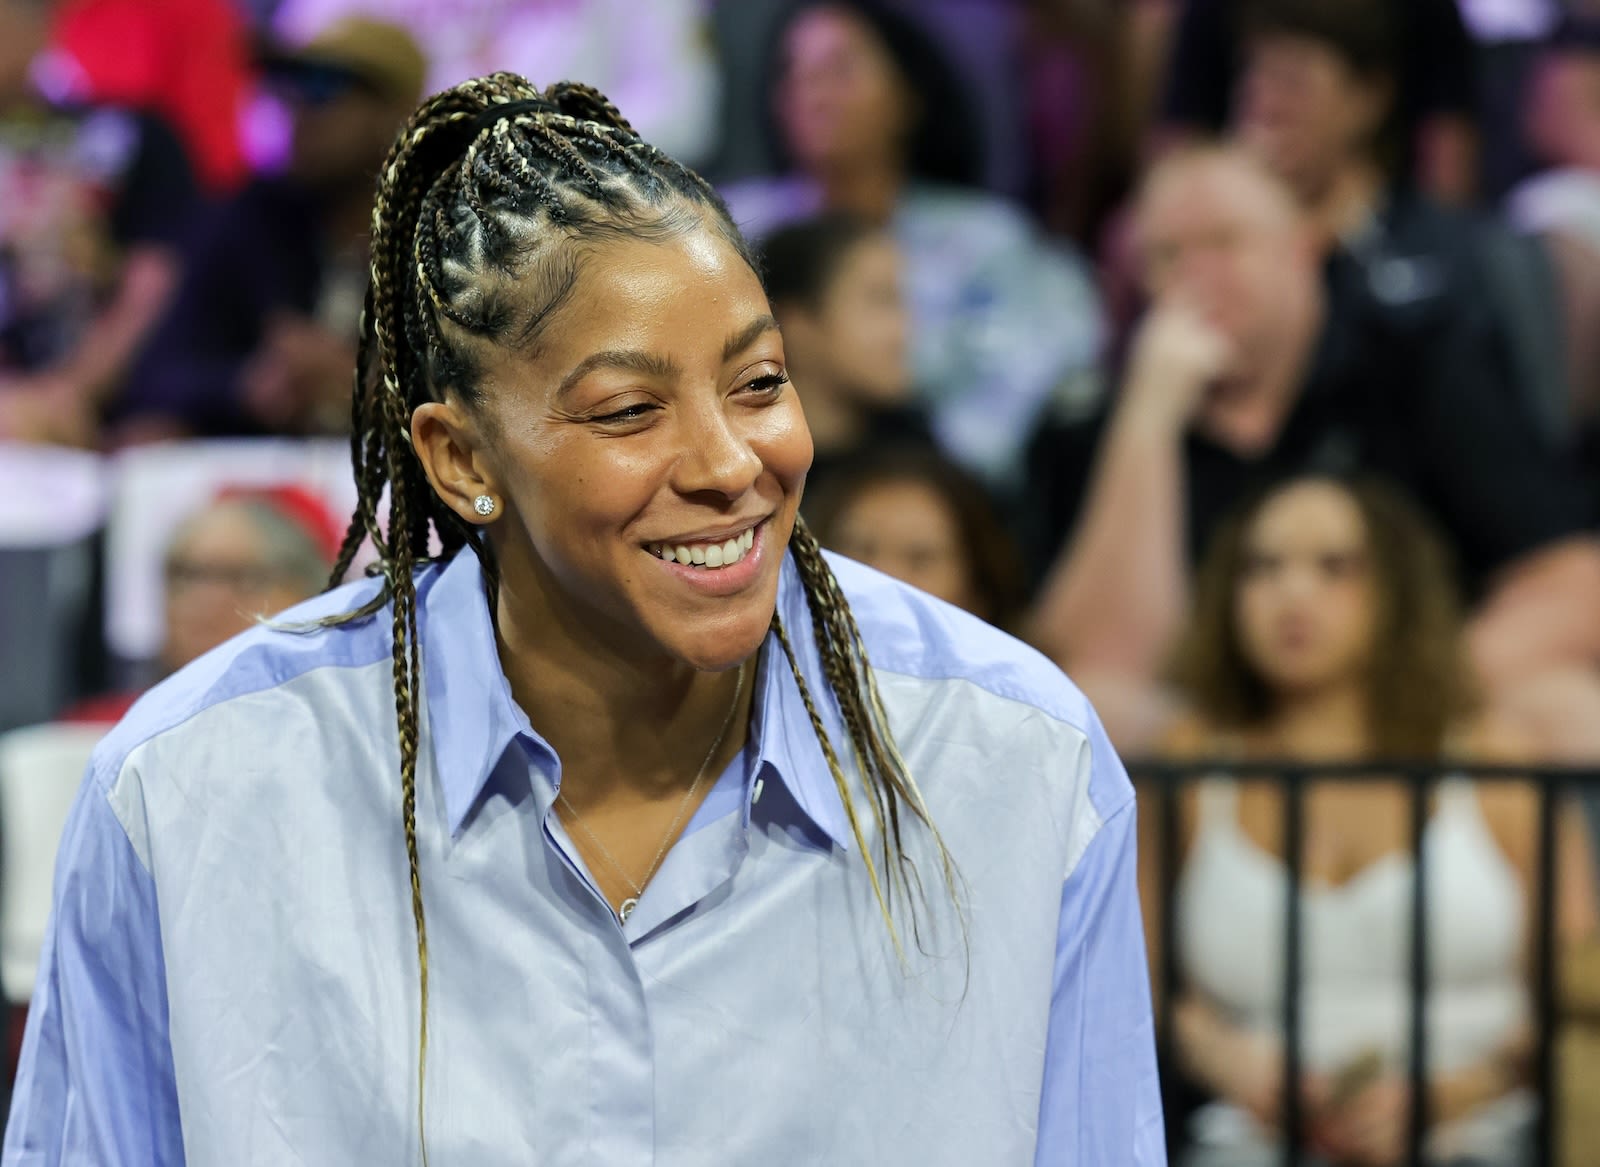 Adidas Makes Herstory: Candace Parker Named President of Women's Basketball, Championing Diversity and Leadership in Sports